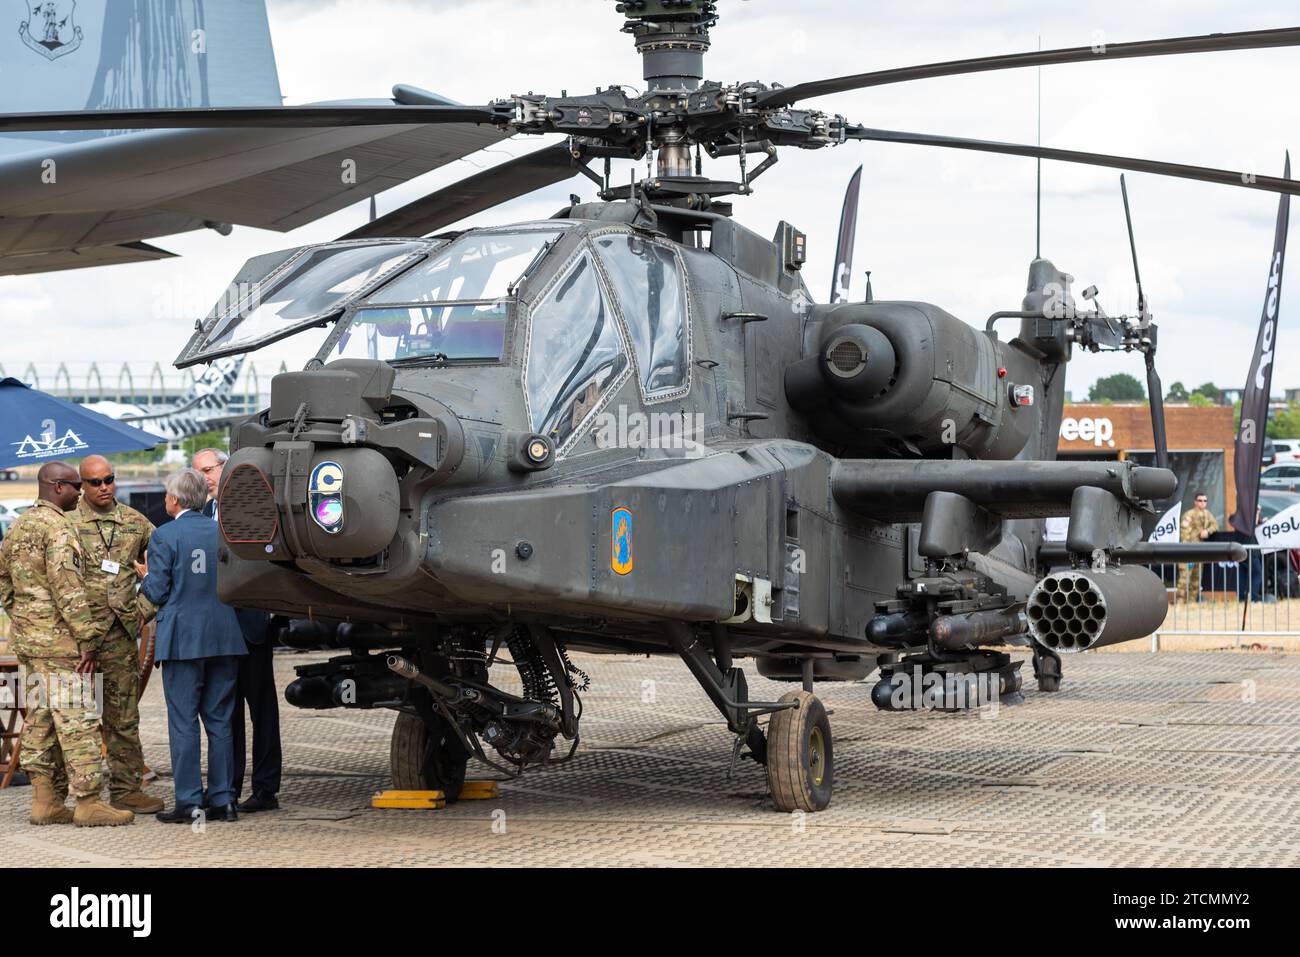 Boeing AH-64 Apache gunship helicopter, weapons & sensors with US personnel and business people at Farnborough International Airshow 2018. Arms trade Stock Photo